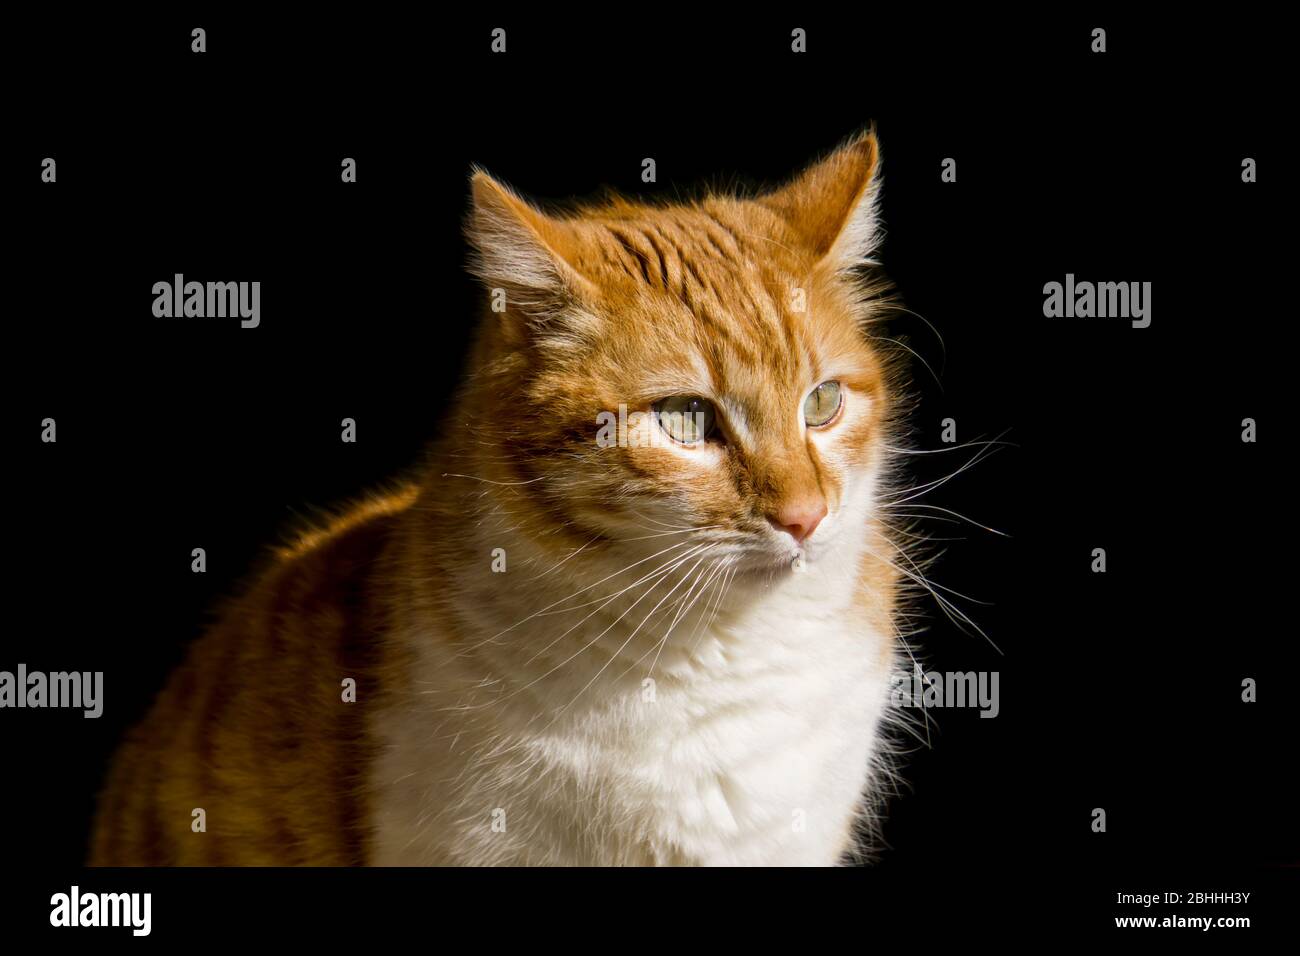 Portrait of a ginger cat Stock Photo